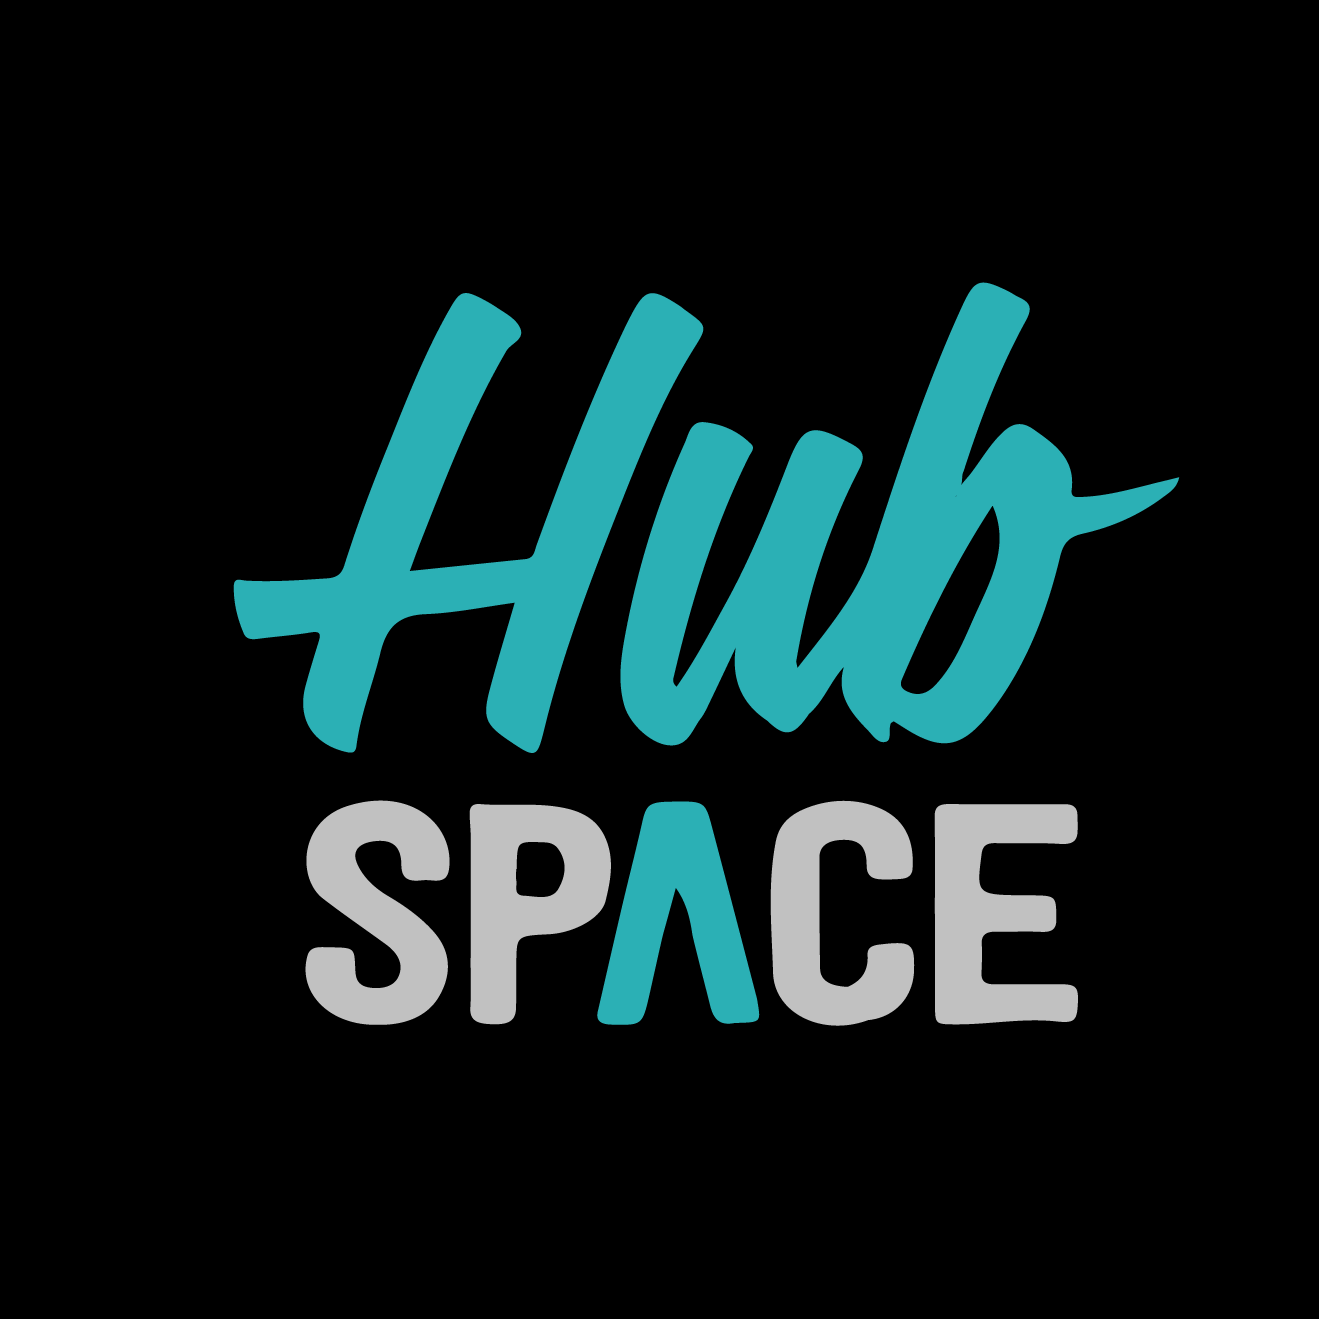 hubspace